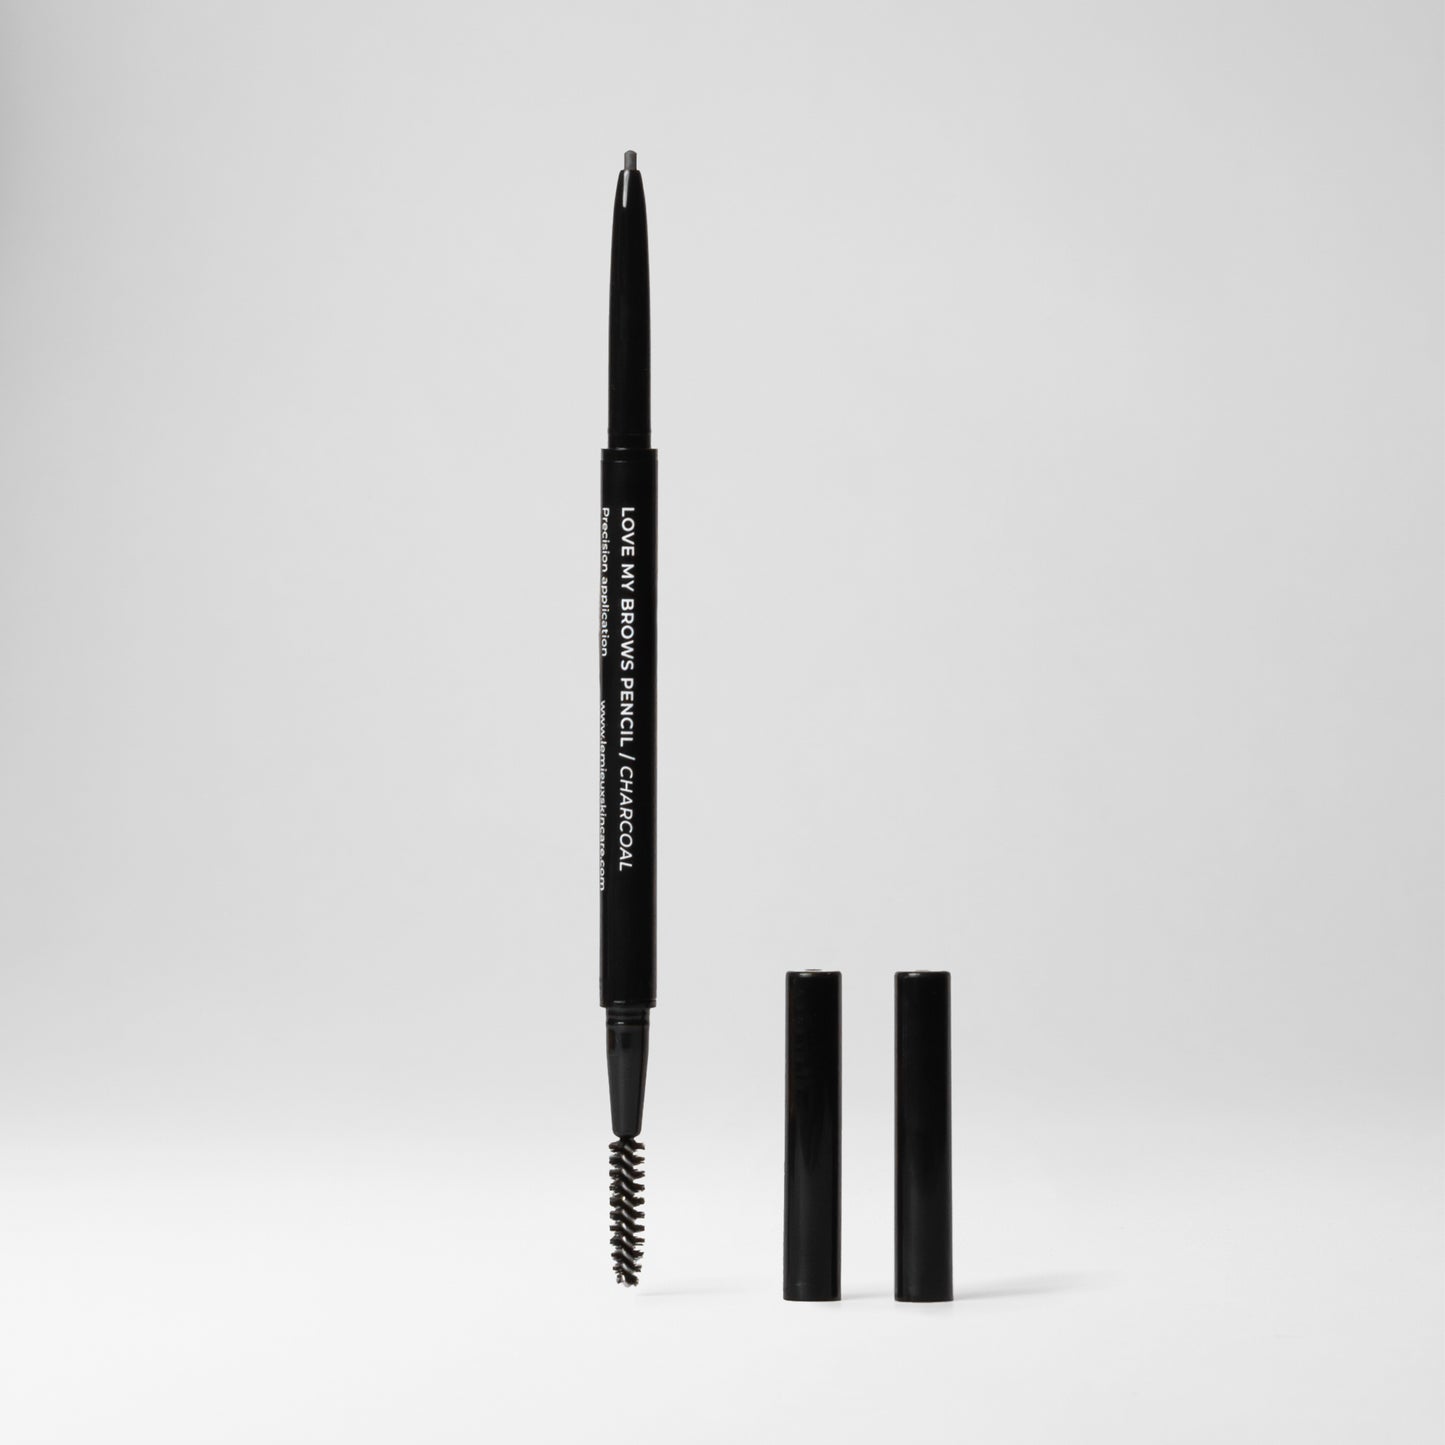 Charcoal Brow Pencil uncapped on both ends with brow pencil on top and brush on the bottom. Caps of both ends standing next to it. All in front of a light grey background.